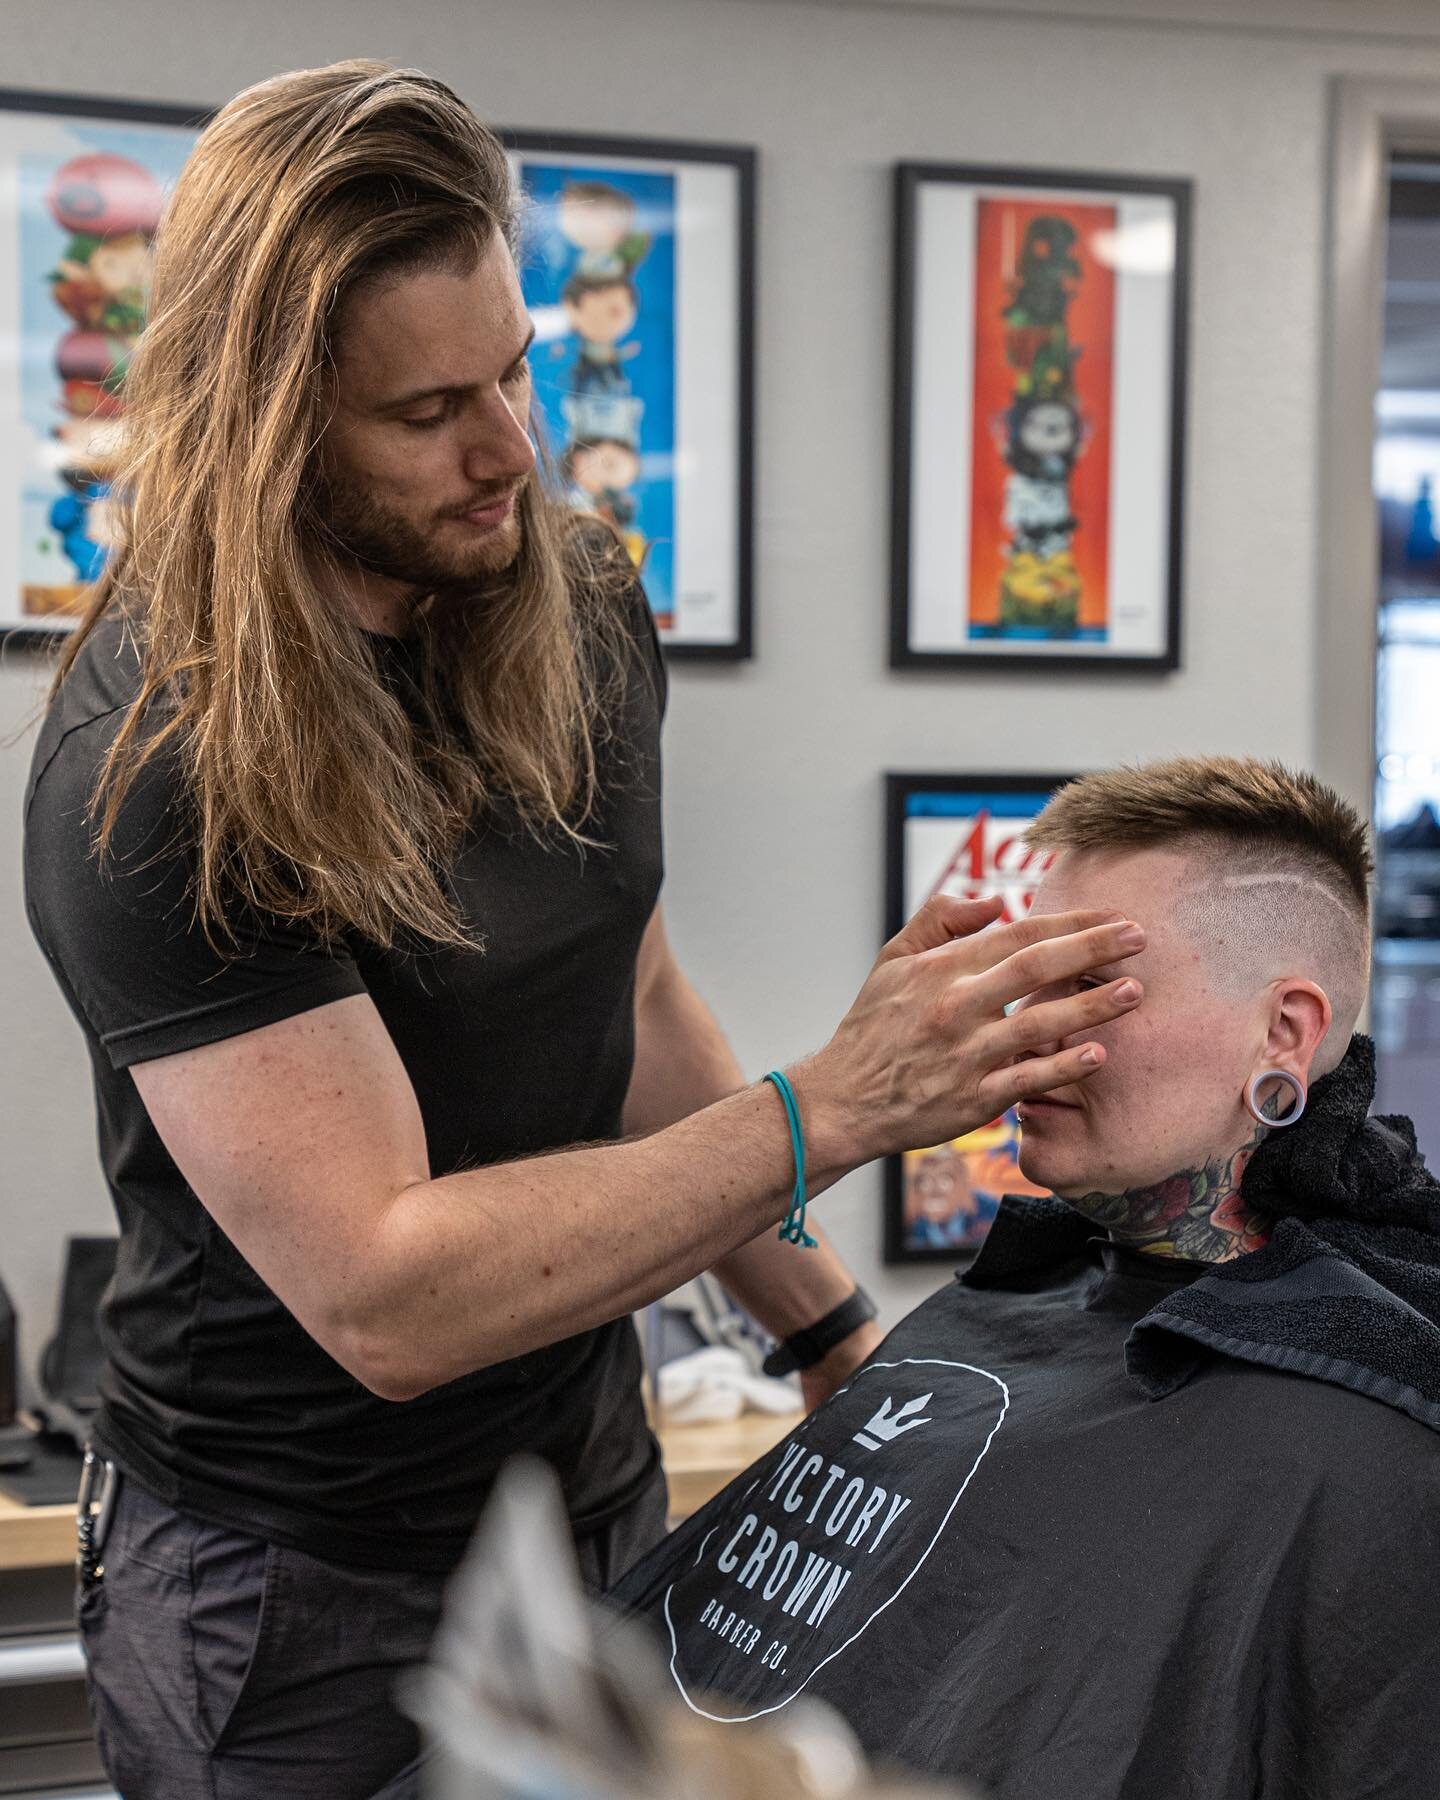 Who&rsquo;s ready for Memorial Day weekend? Our weekend appointments are all filled up, but you can get yourself on the books at TheBarberStory.com 

#BoiseBarber